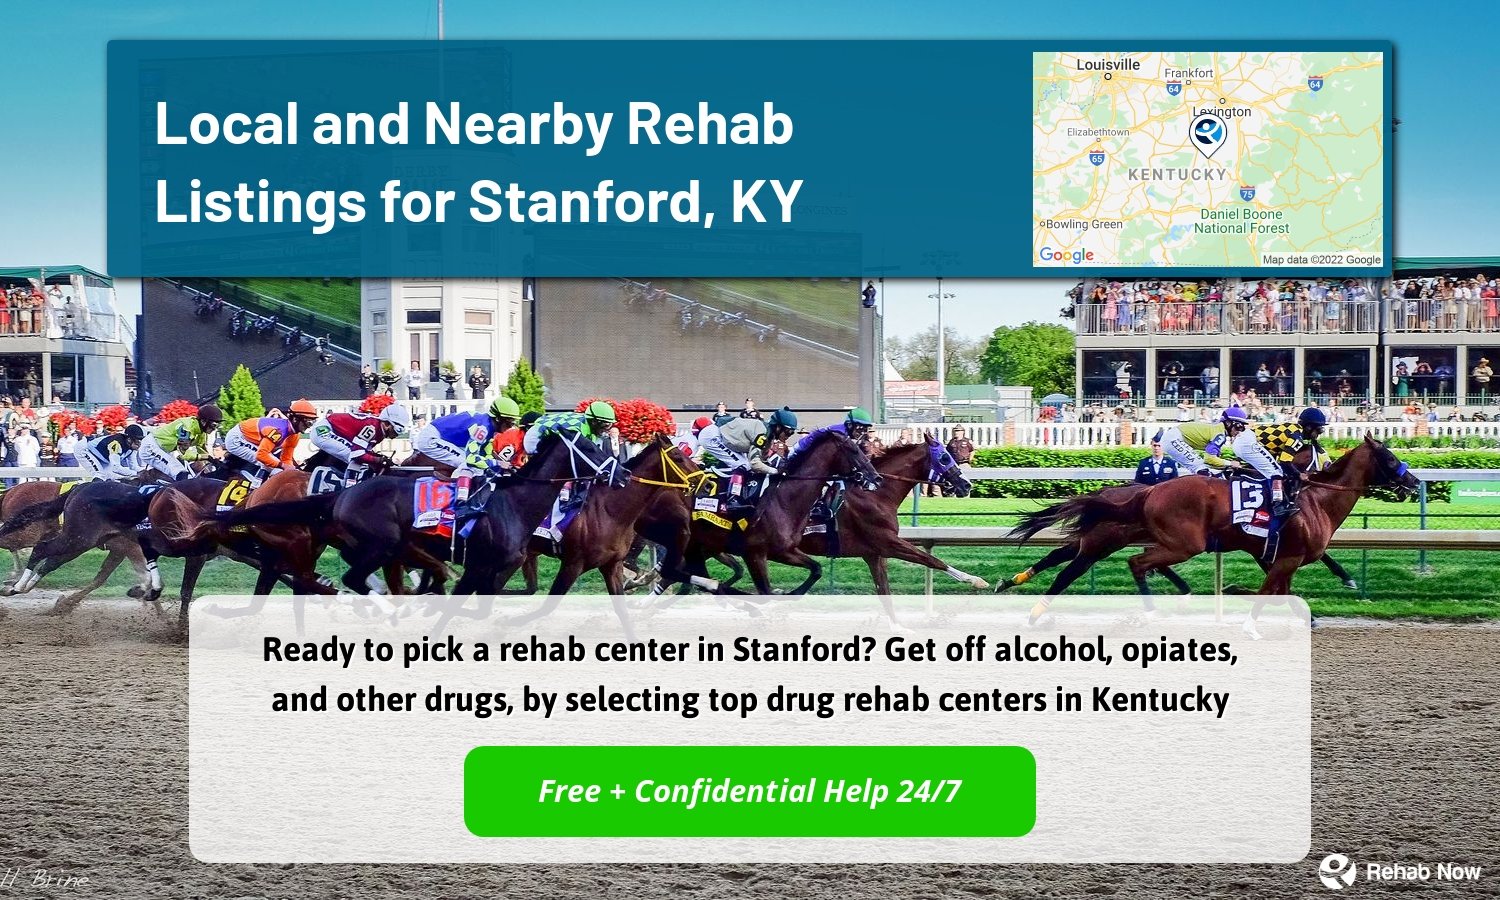 Ready to pick a rehab center in Stanford? Get off alcohol, opiates, and other drugs, by selecting top drug rehab centers in Kentucky